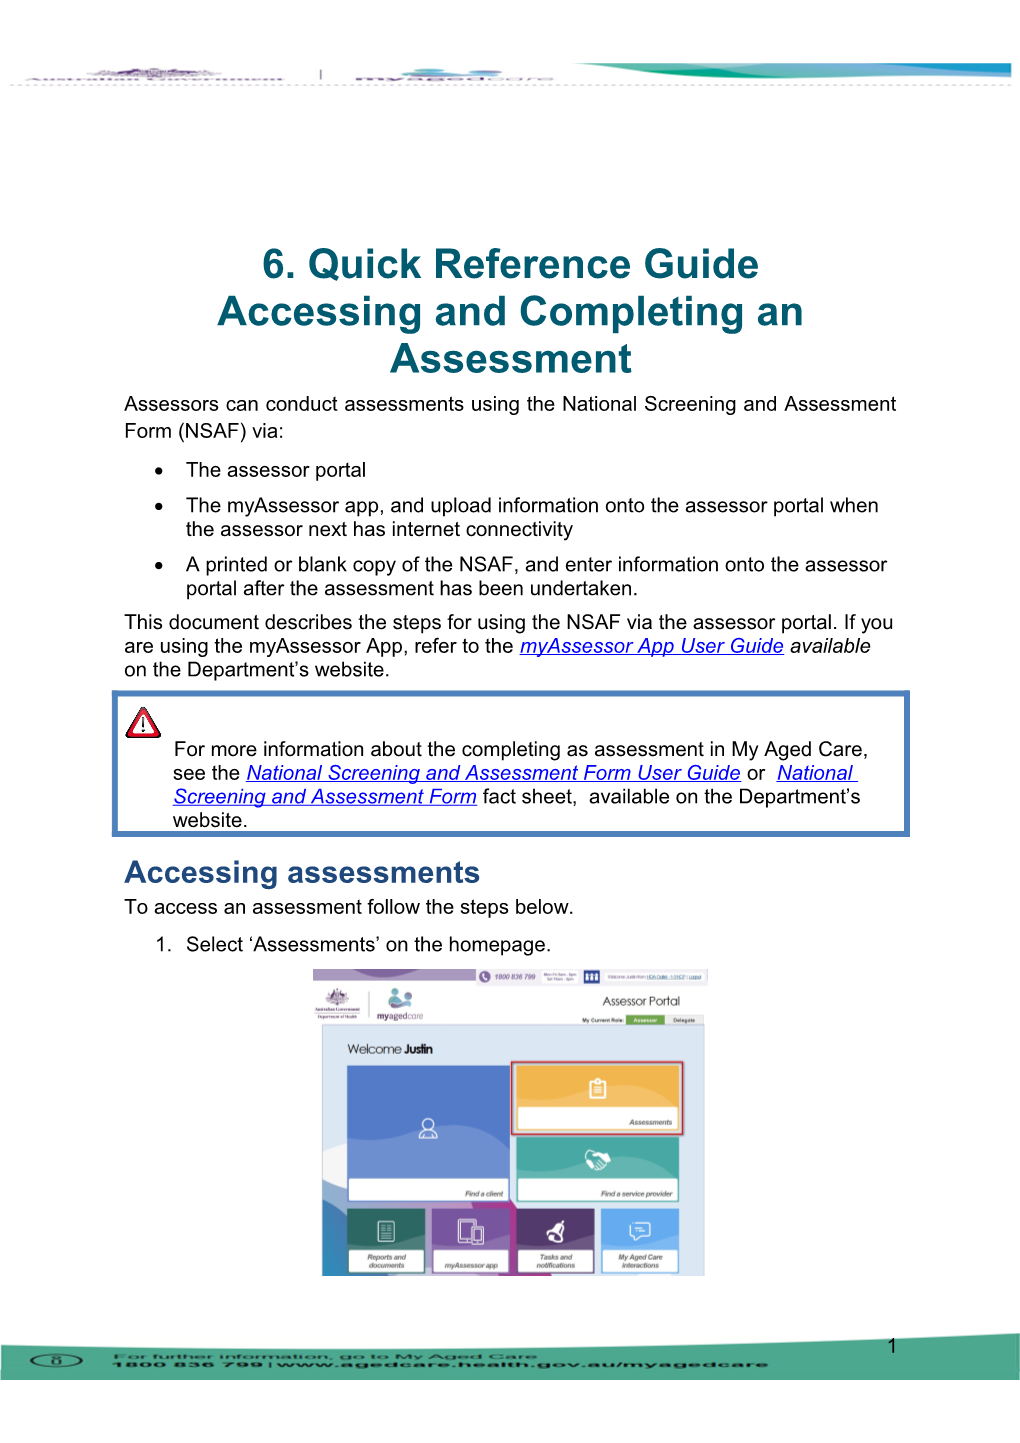 6. Quick Reference Guide Accessing and Completing an Assessment